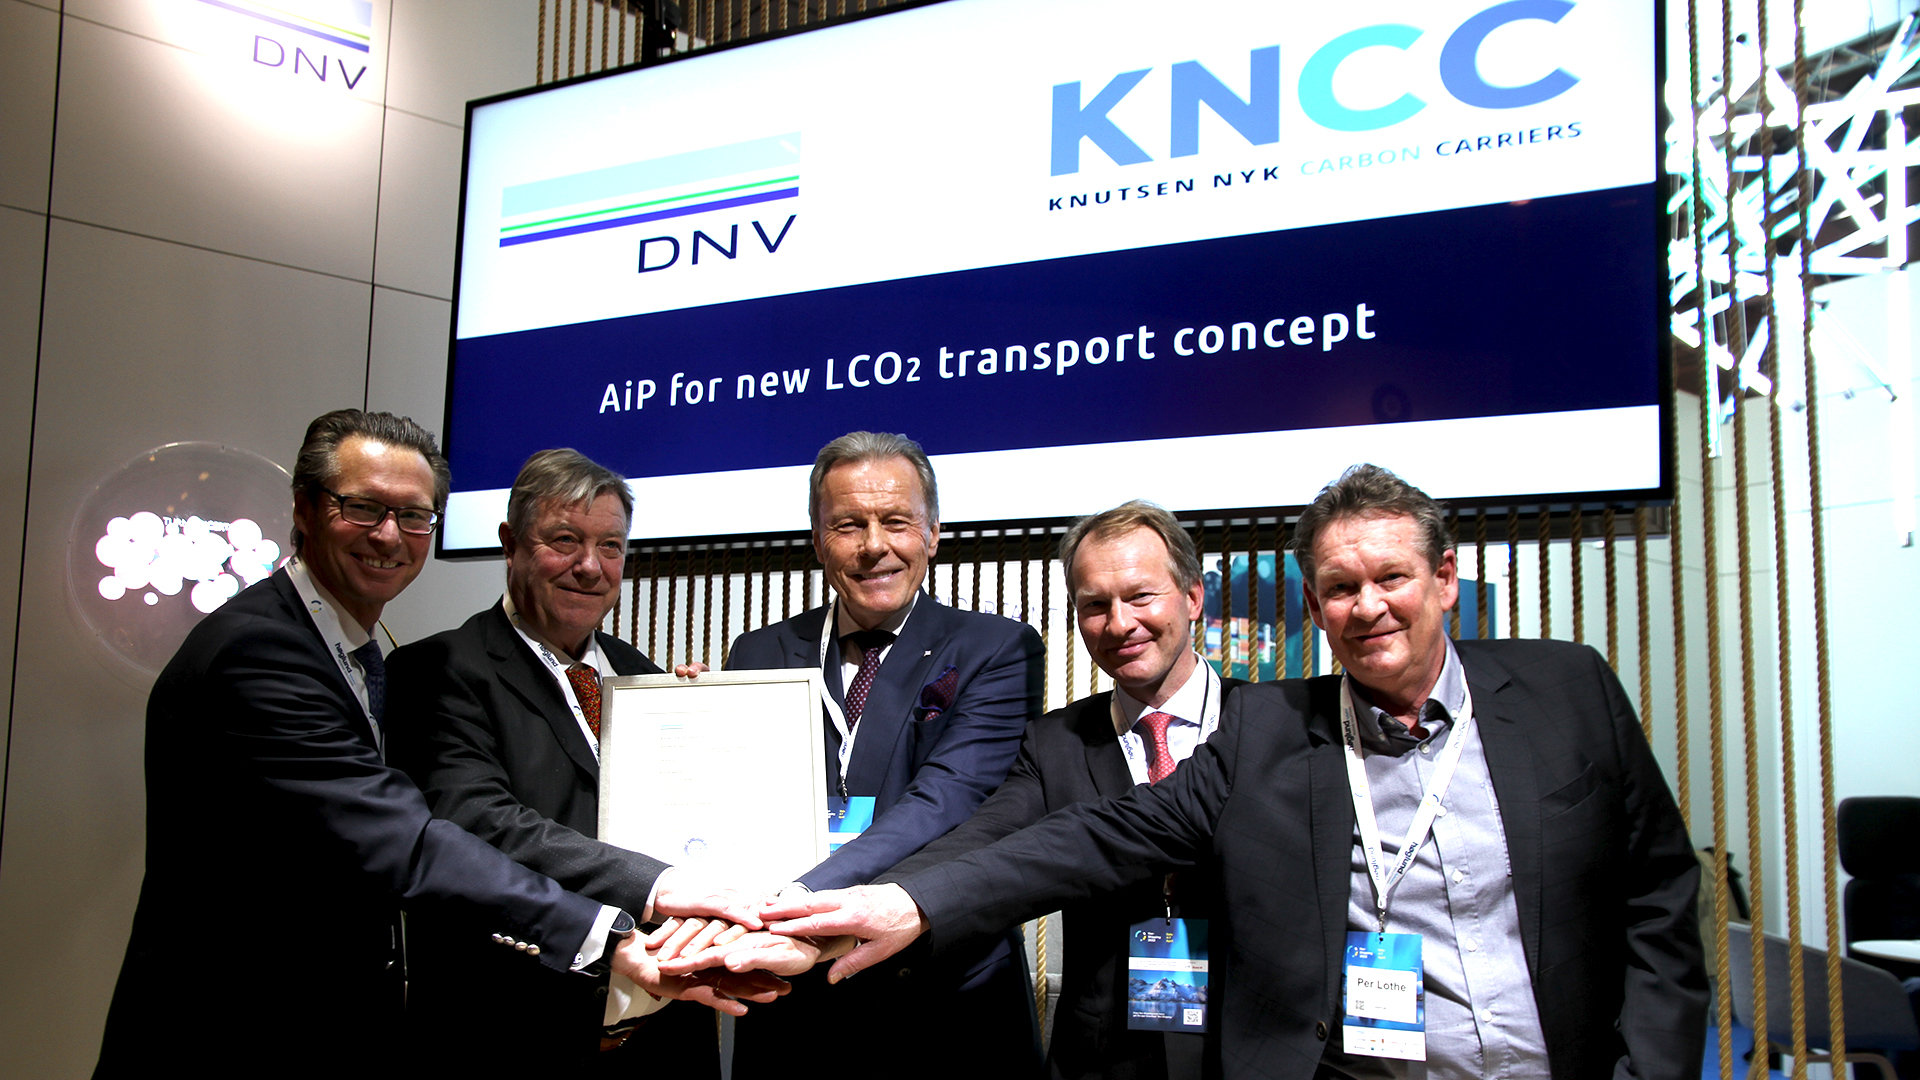 2 DNV KNCC Aip 01